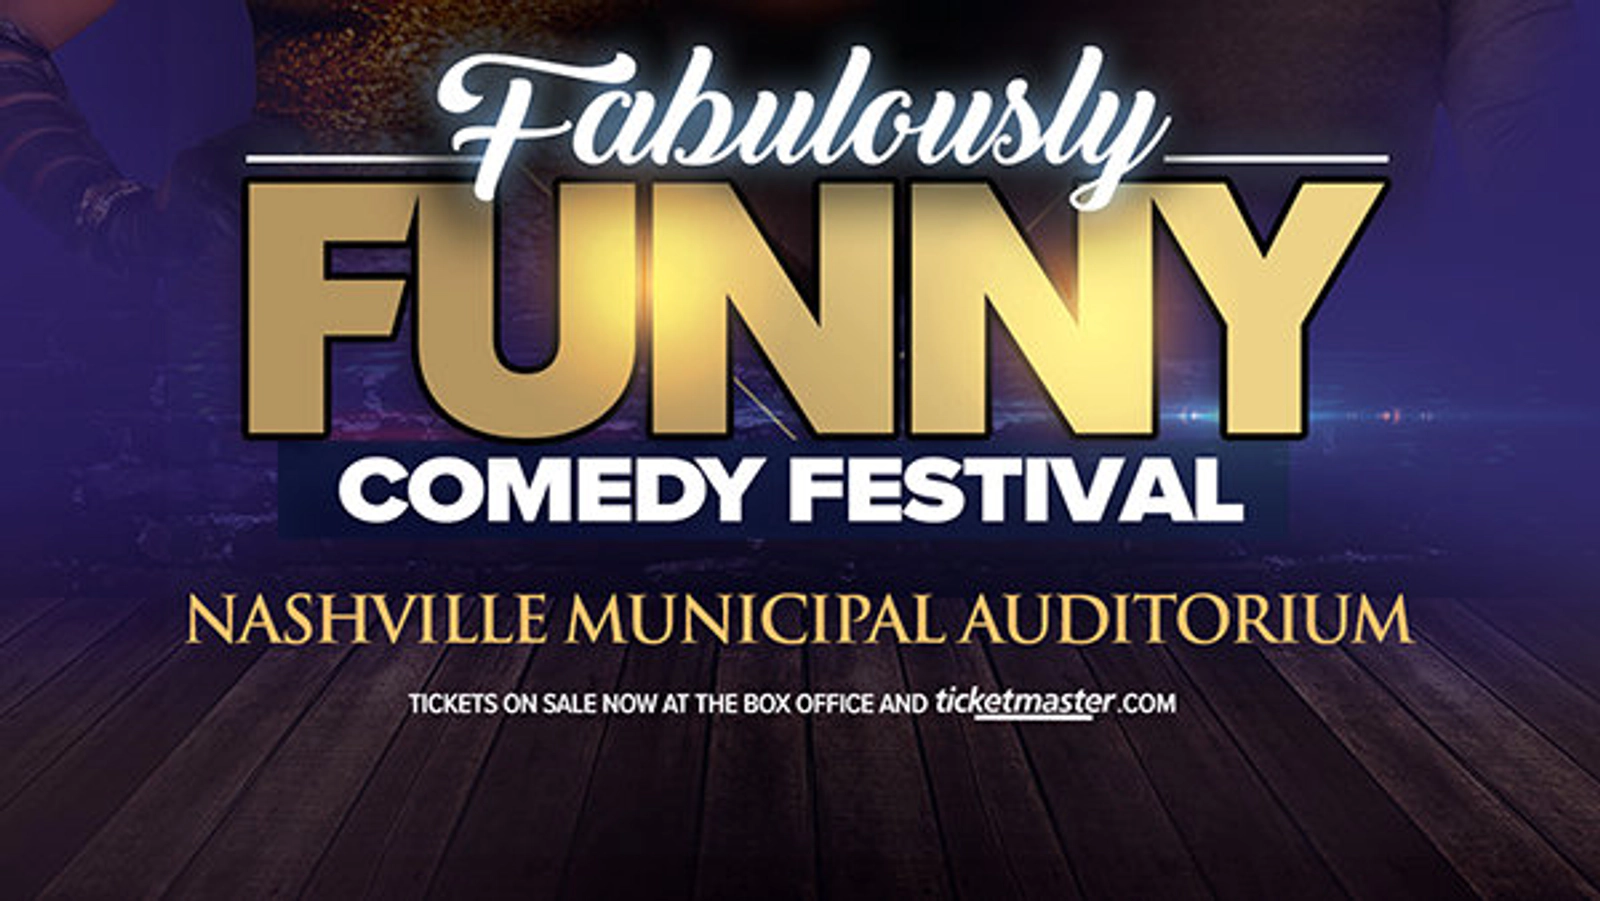 The Fabulously Funny Comedy Festival featuring Mike Epps - Thumbnail Image